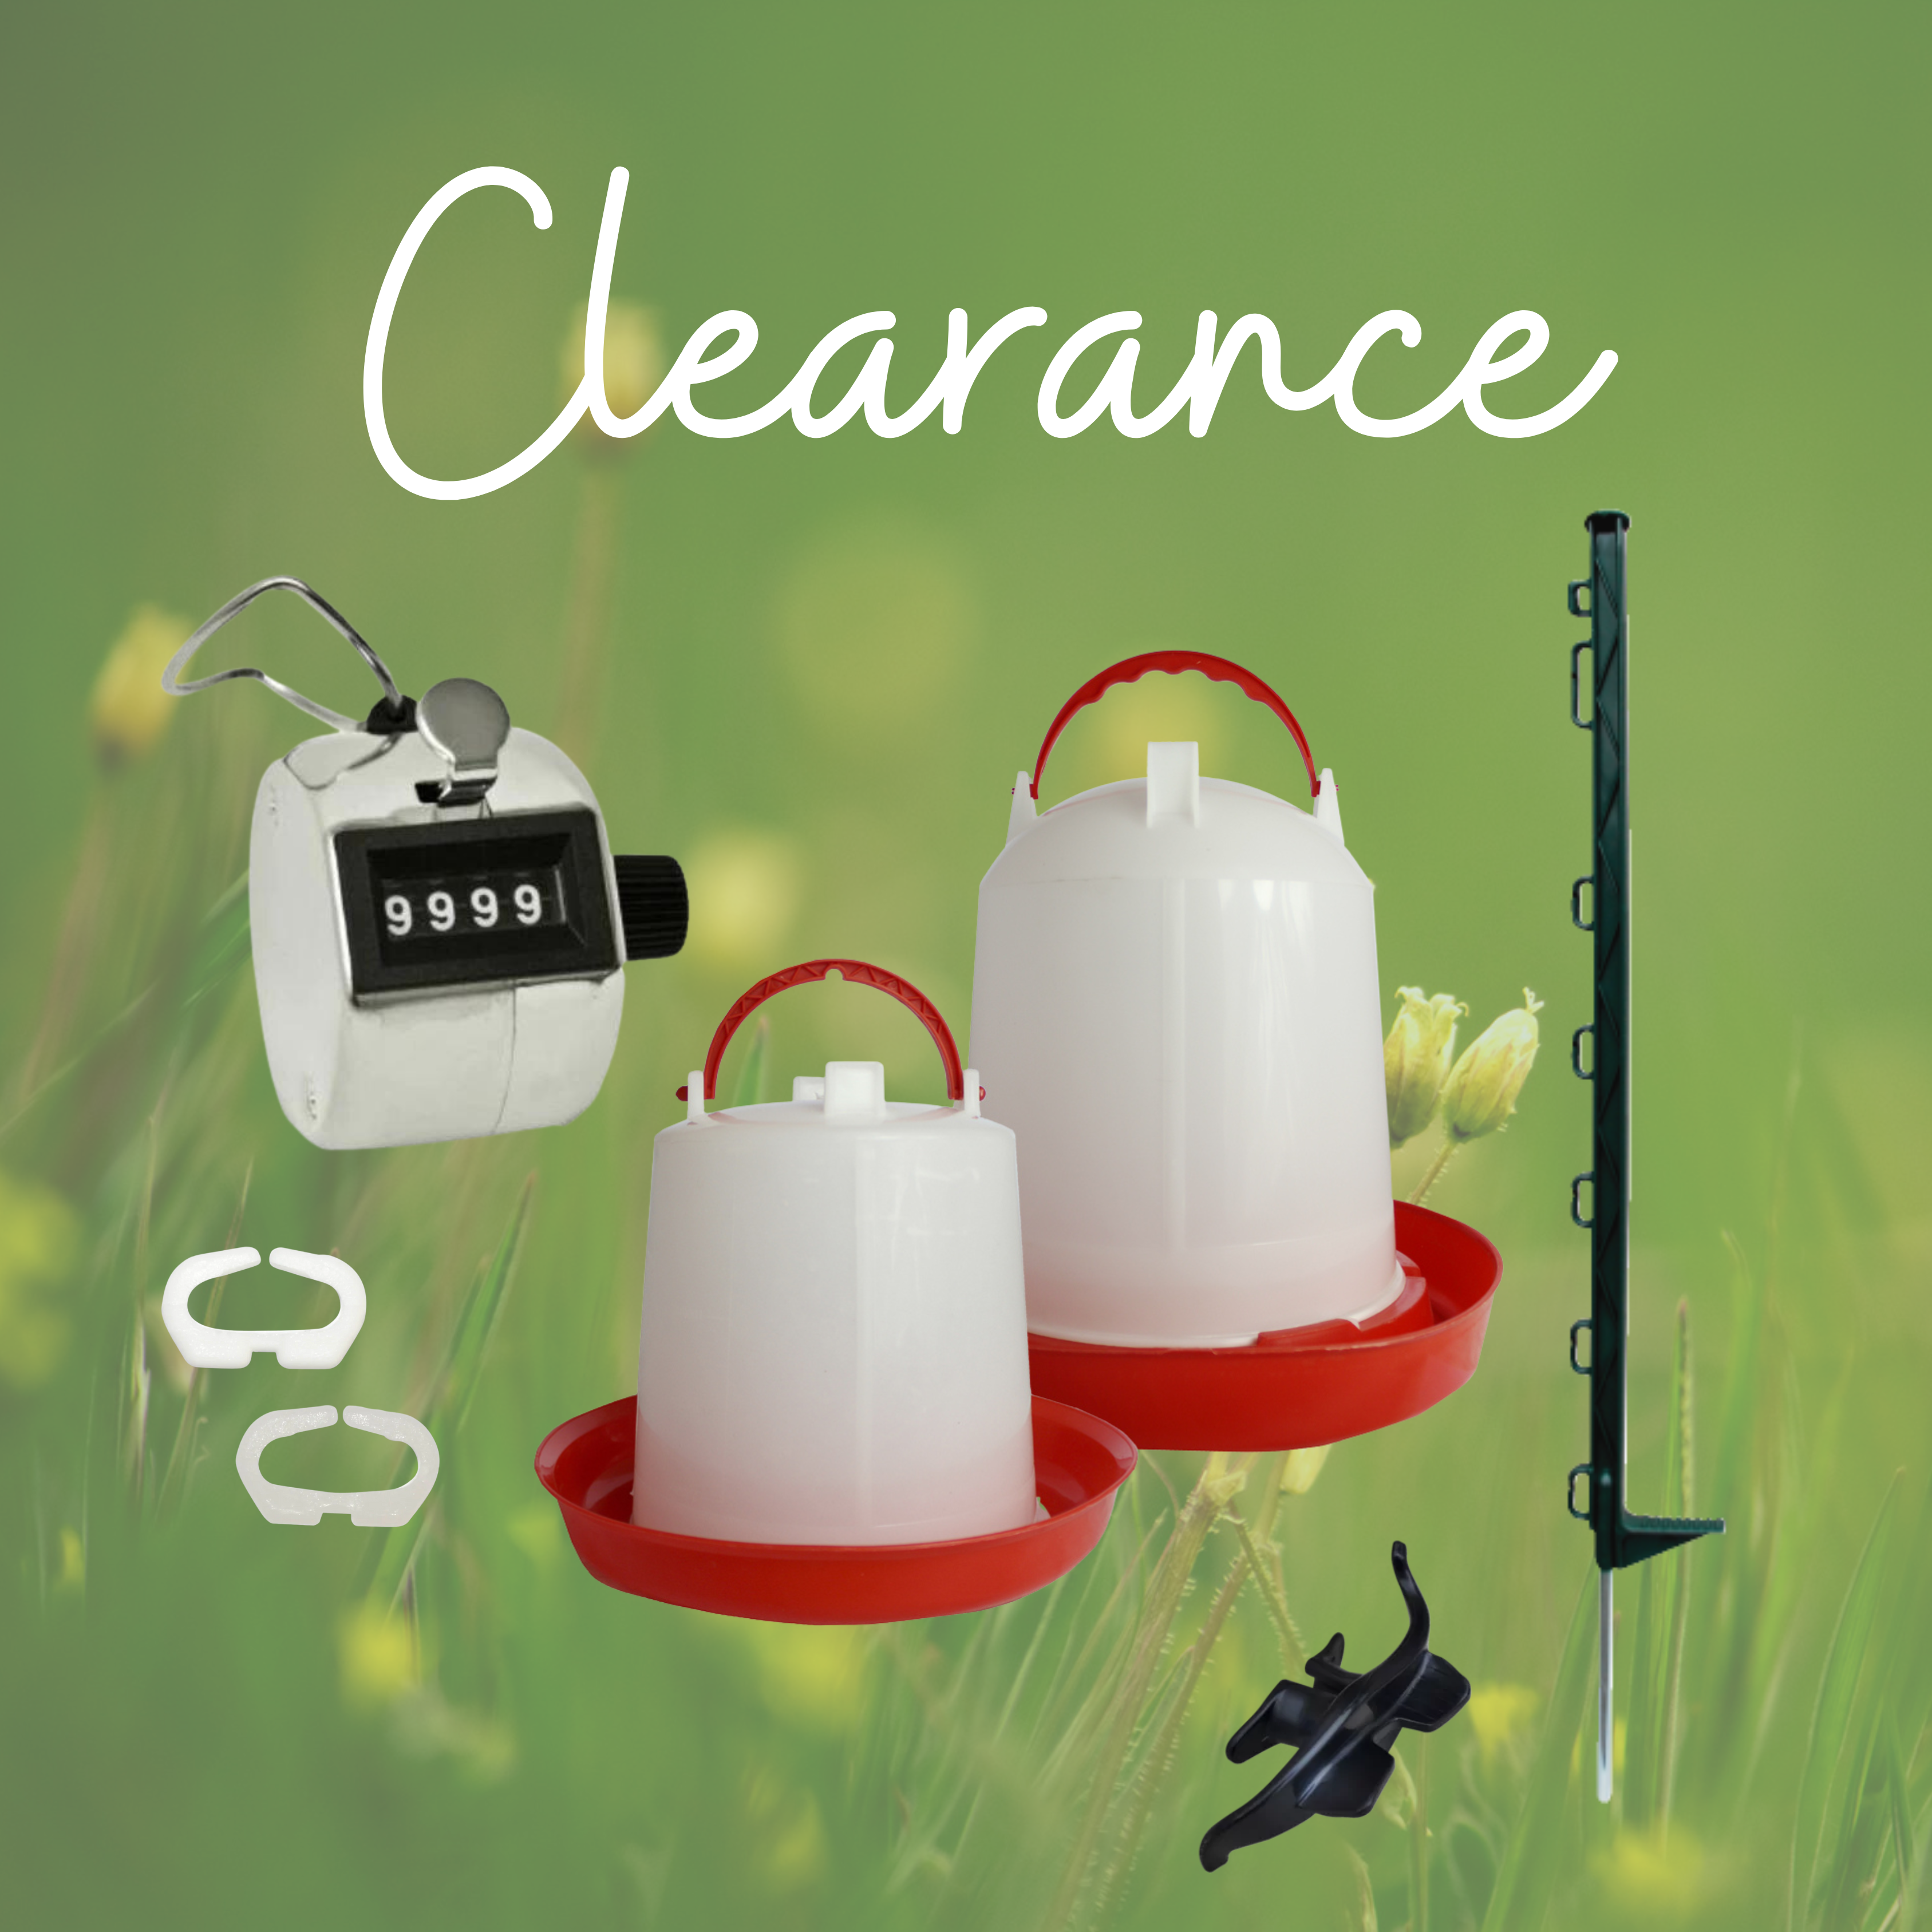 Clearance - Game Keeping Supplies